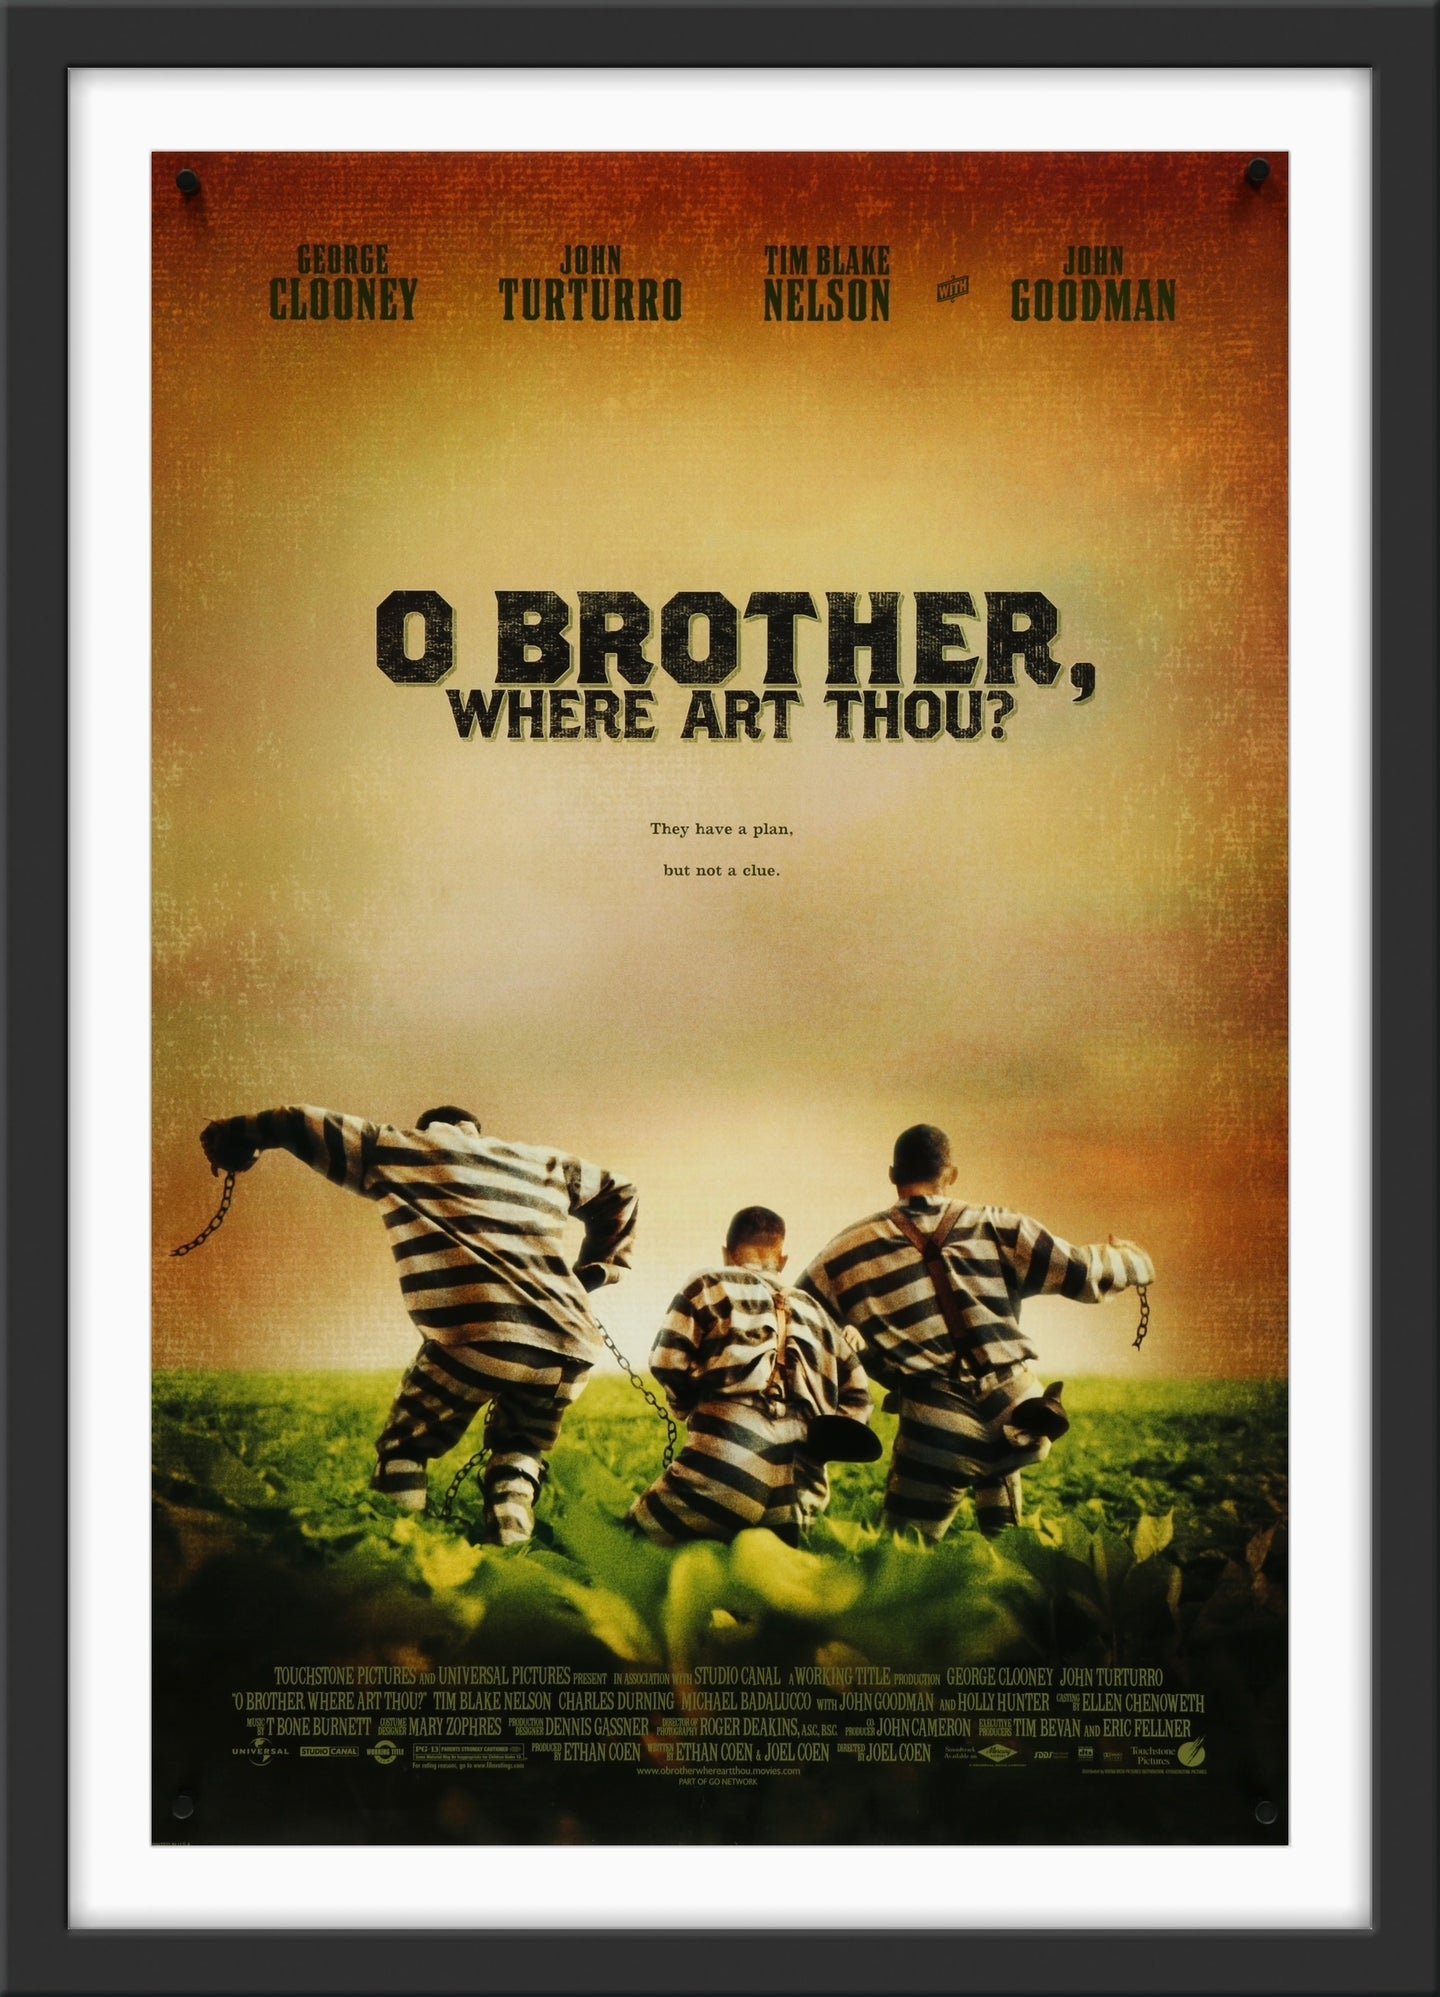 An original movie poster for the film O Brother, Where Art Thou? 